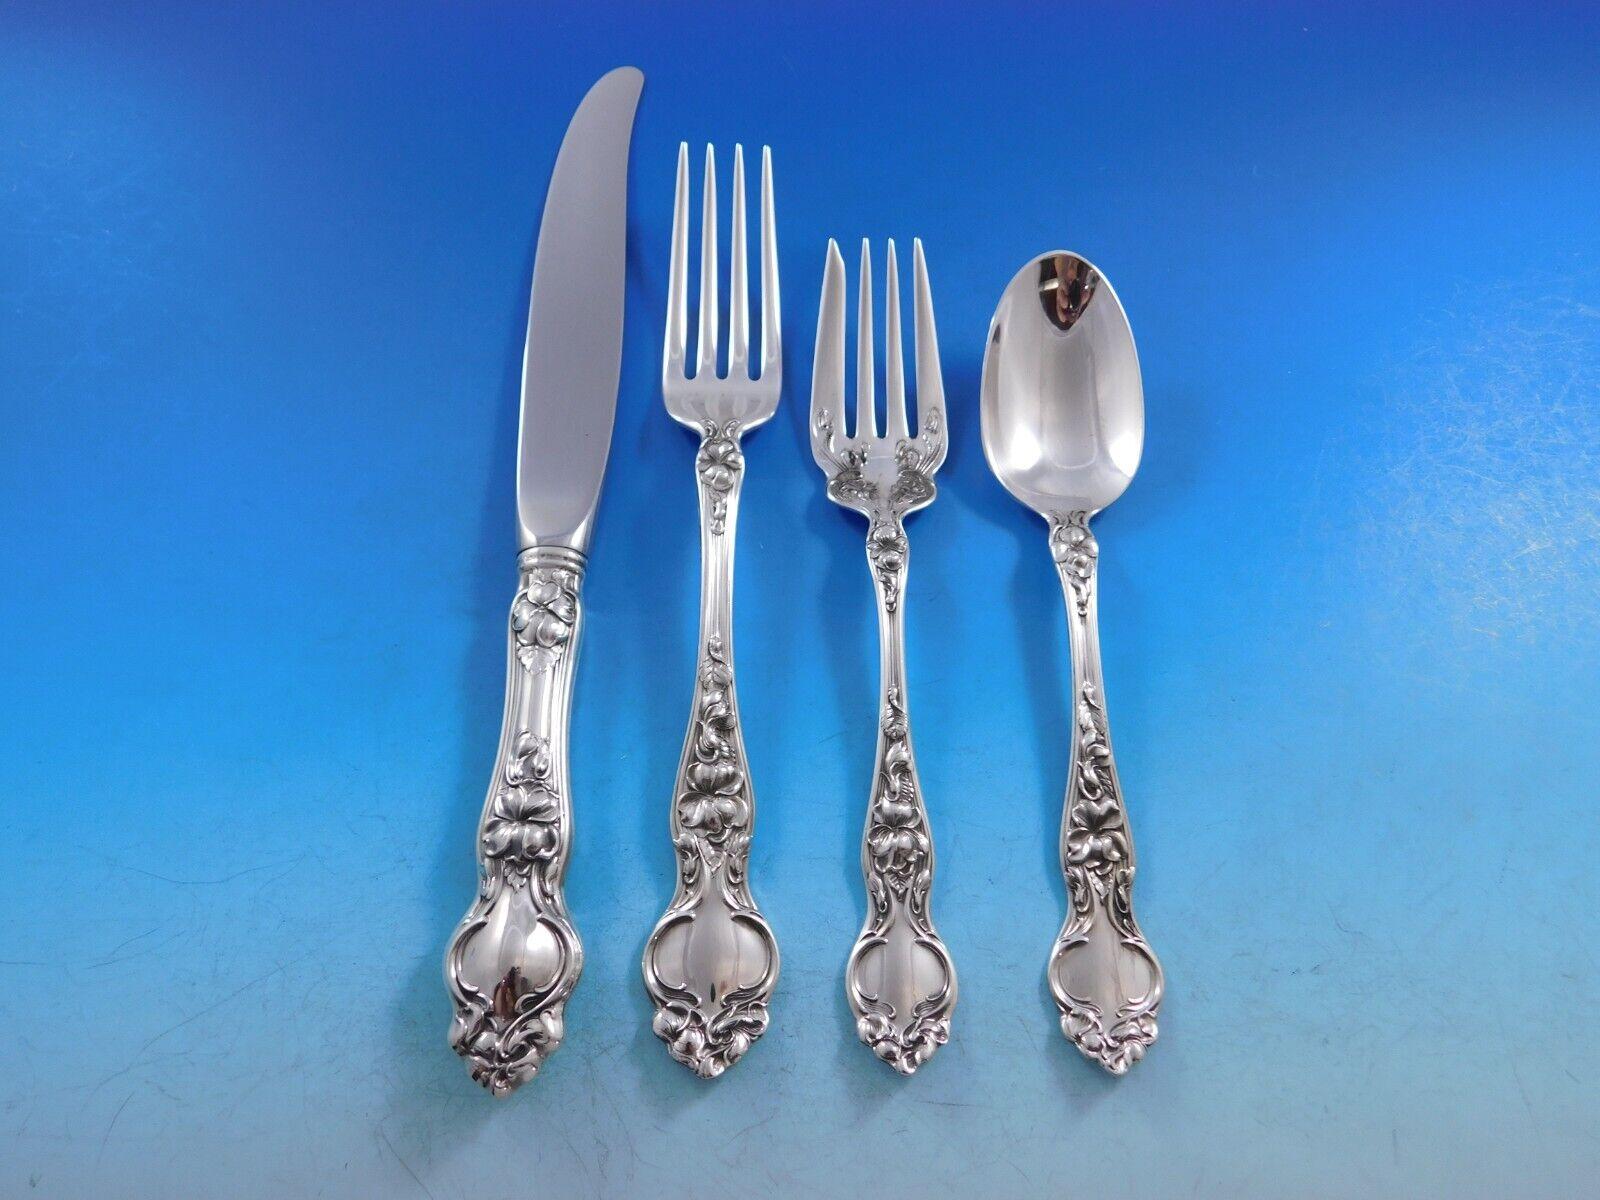 Violet by Wallace Sterling Silver Flatware Service for 12 Set 60 pcs no monogram In Excellent Condition For Sale In Big Bend, WI